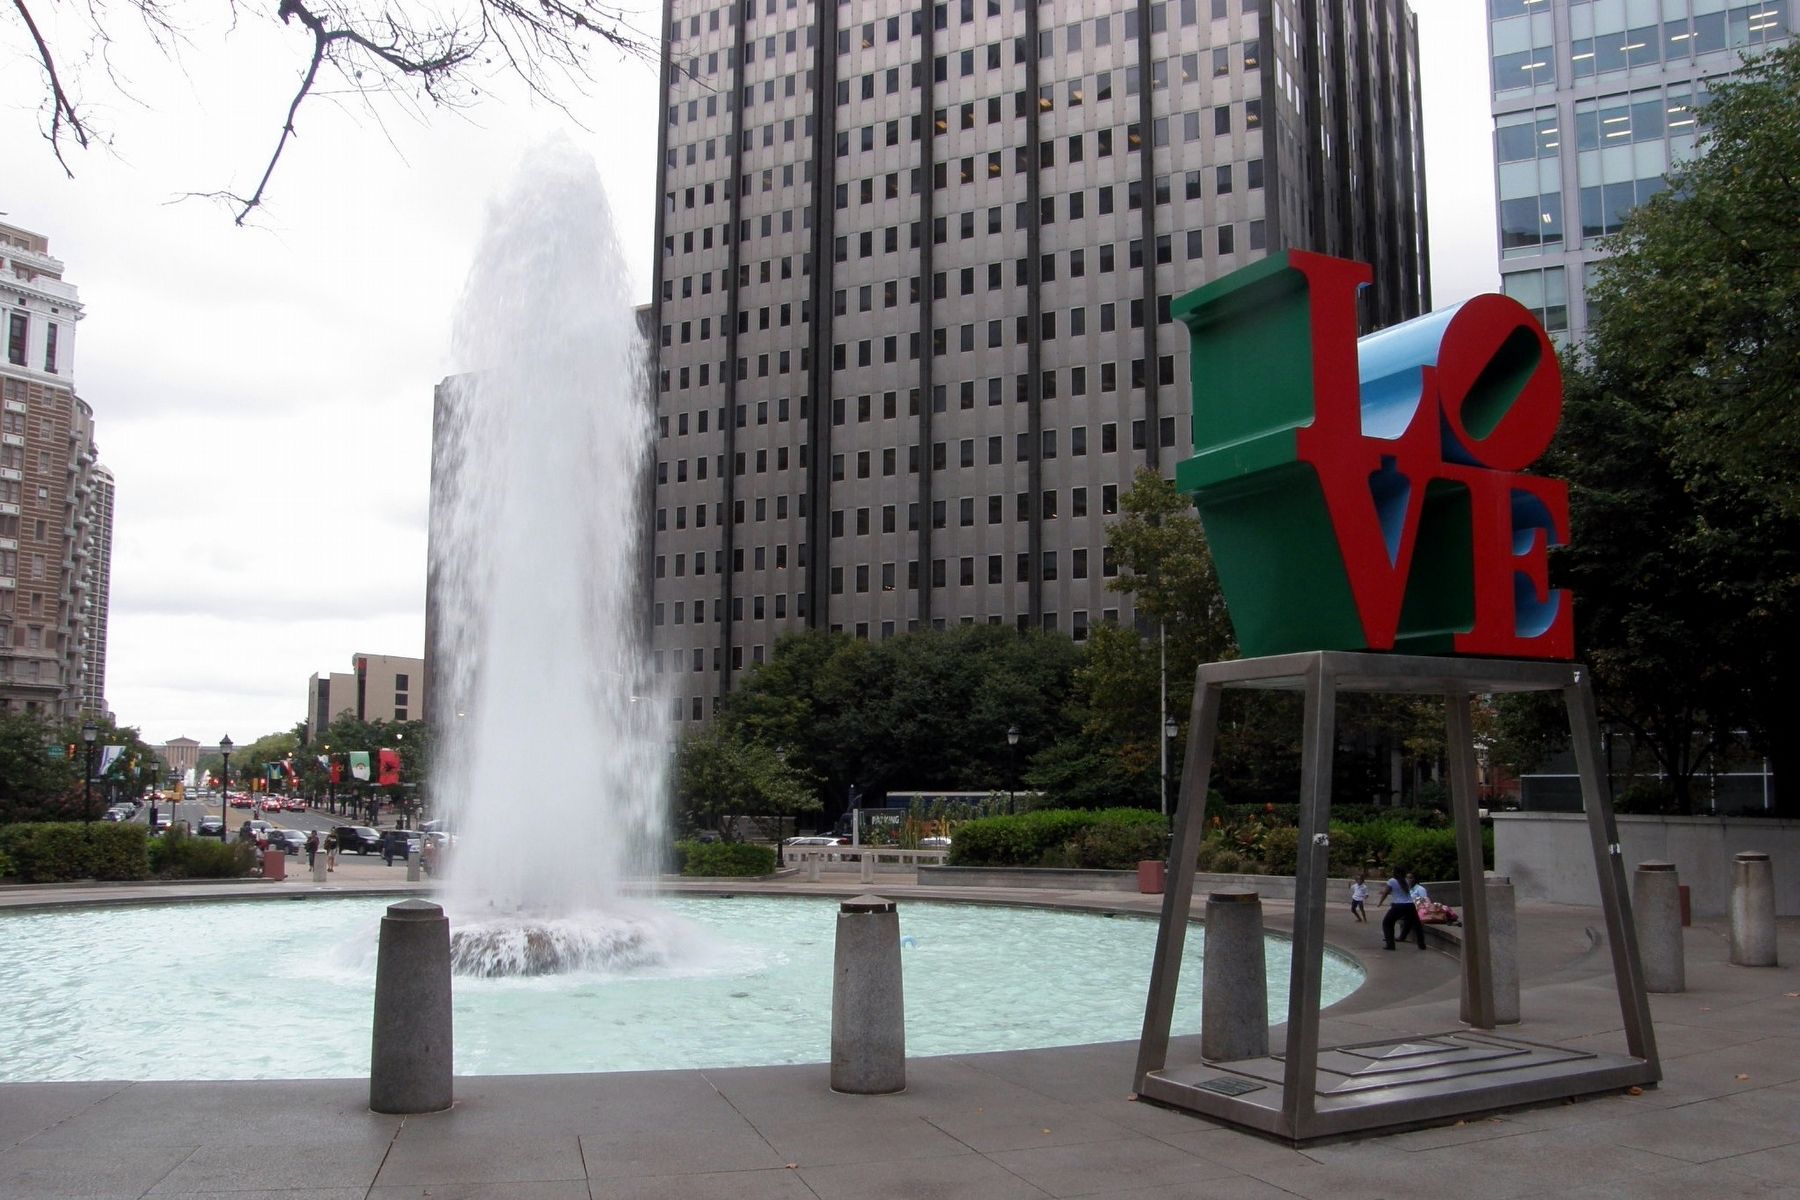 The fountain and "LOVE" image. Click for full size.